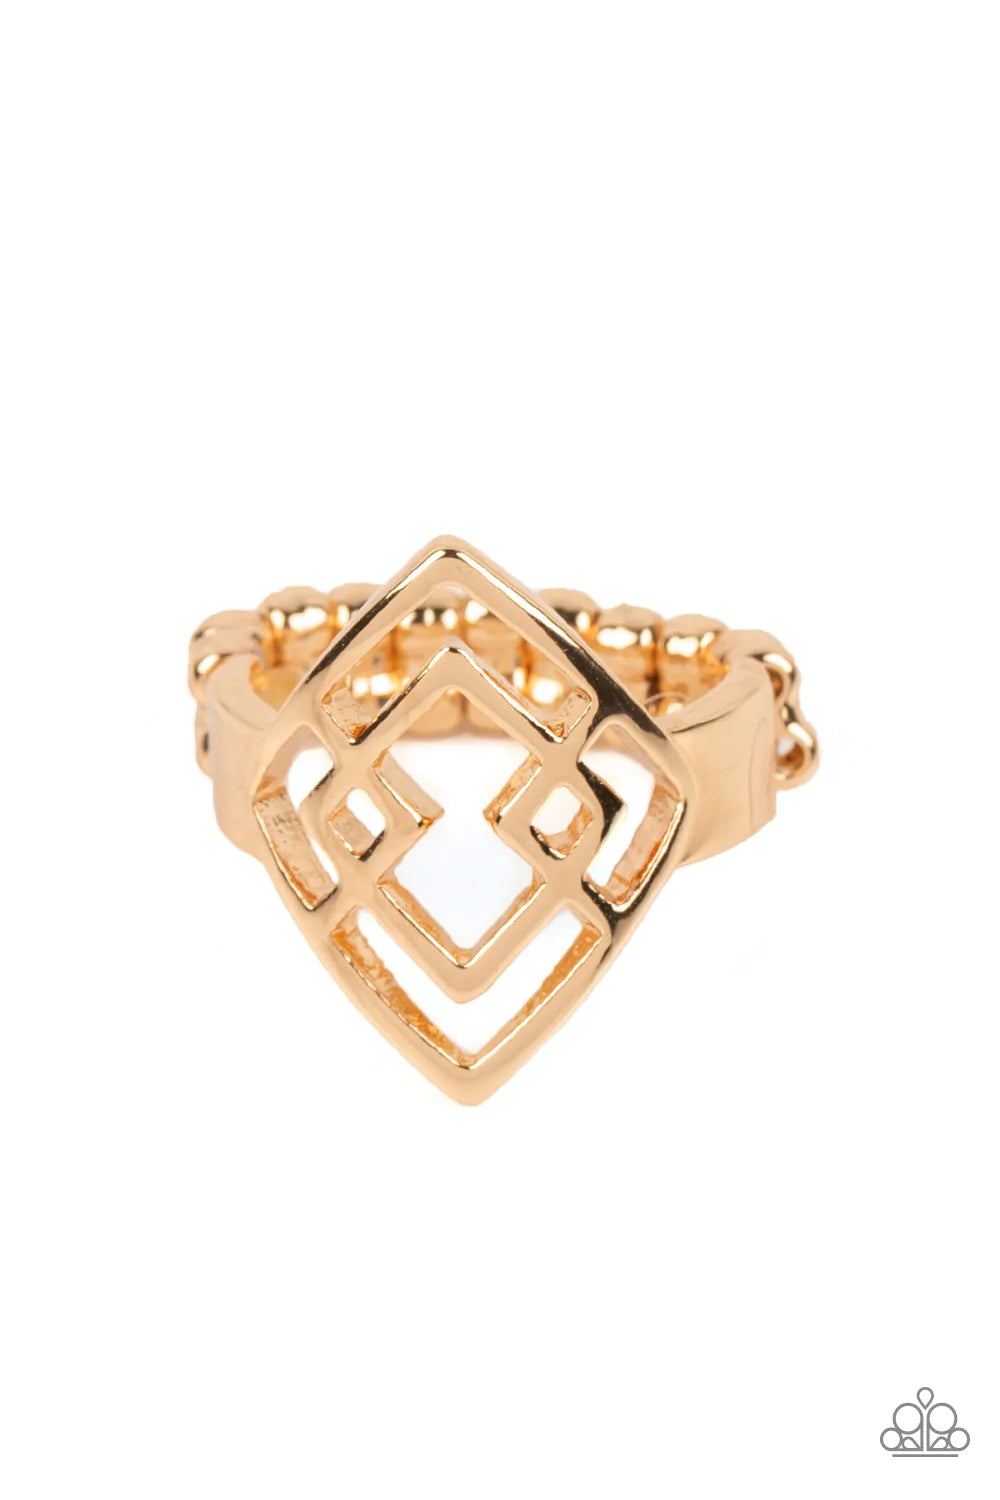 Paparazzi Accessories Diamond Duo - Gold Gold diamond silhouettes stack and interlock into an optical illusion atop the finger, resulting in an edgy geometric statement piece. Features a dainty stretchy band for a flexible fit. Sold as one individual ring